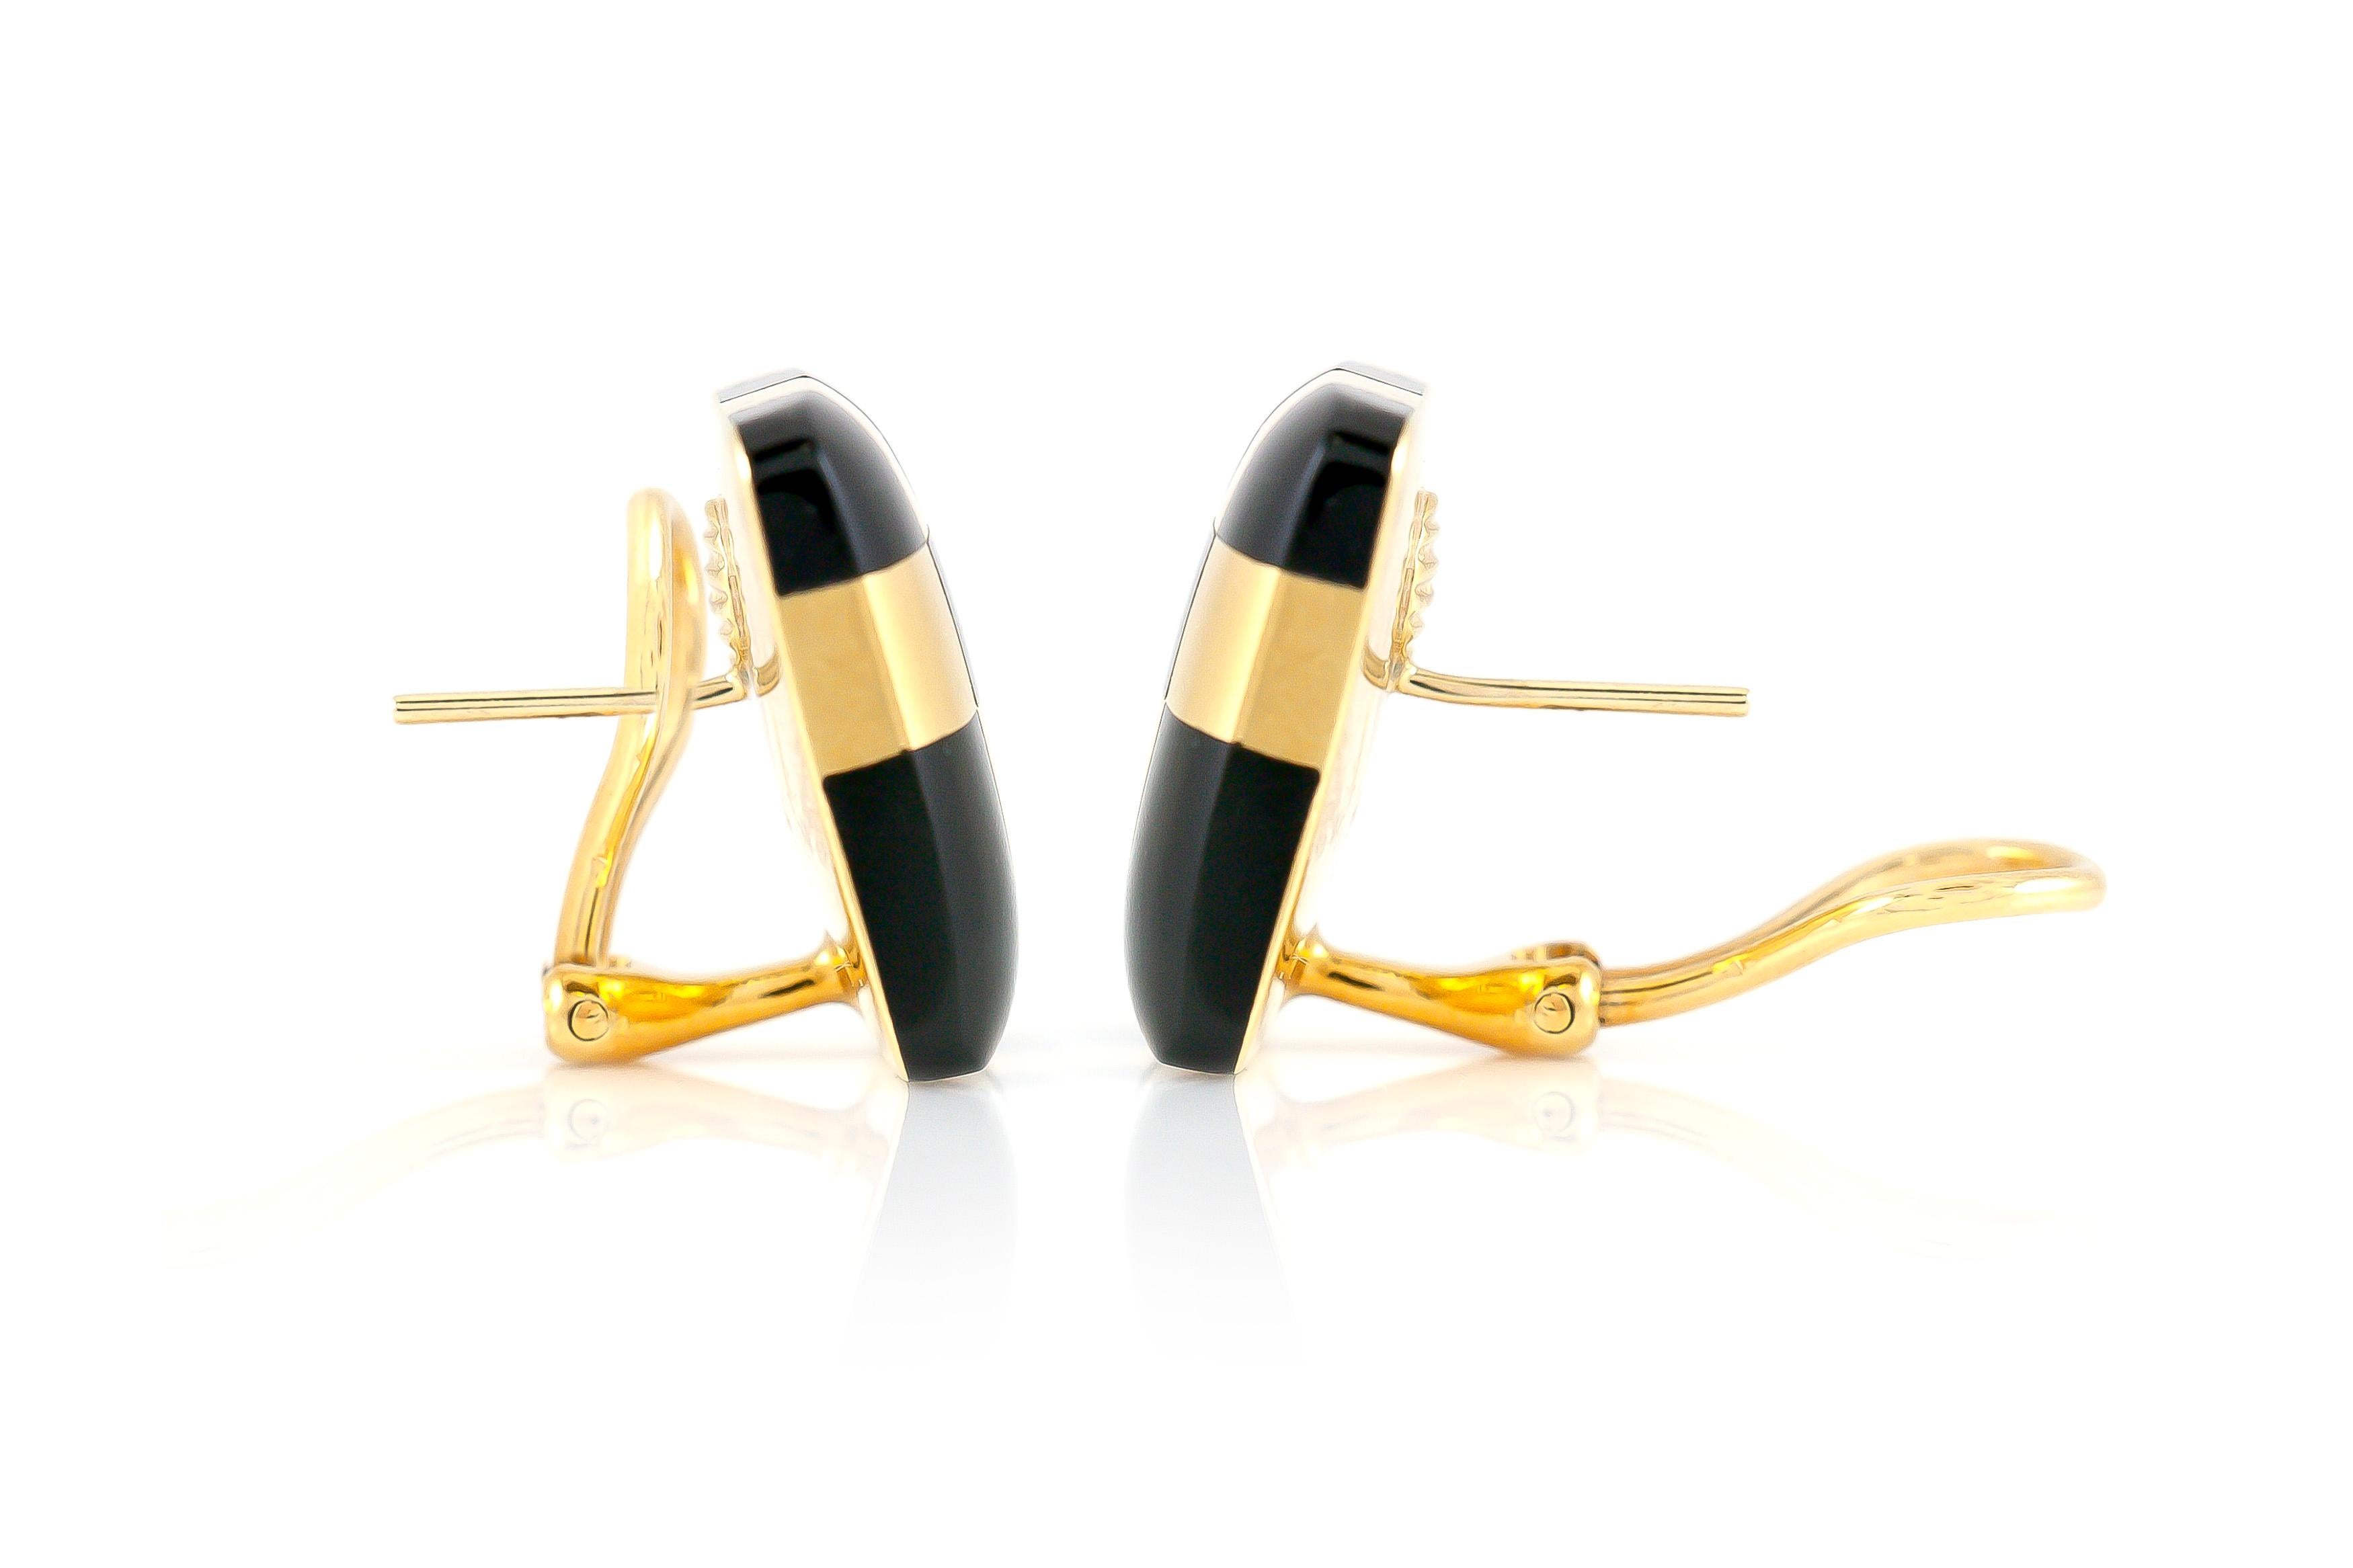 The earrings is finely crafted in 18k yellow gold with black onyx.
Sign by Tiffany & Co.